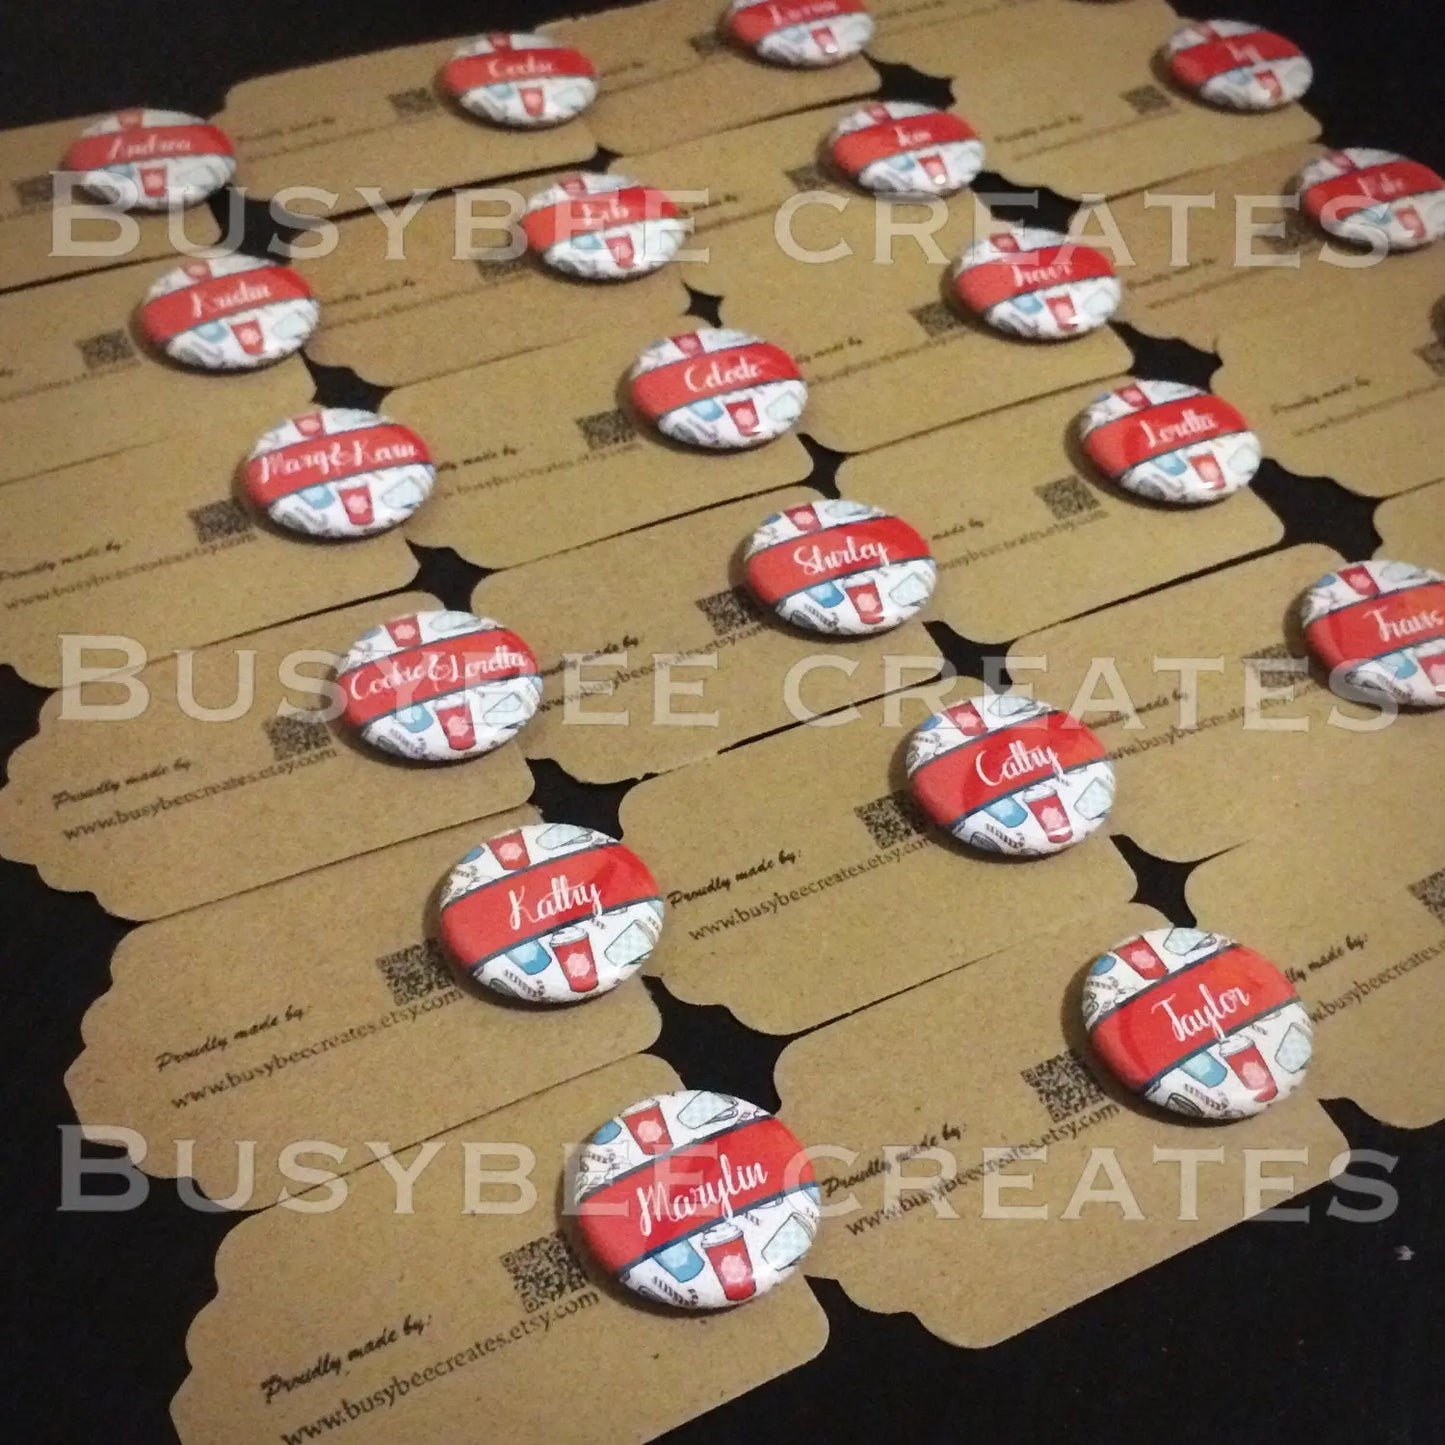 Coffee Themed Holiday Place Cards/ Seating Chart Christmas Wedding Custom Button Pins - (1&quot;) 25 pcs busybeecreates